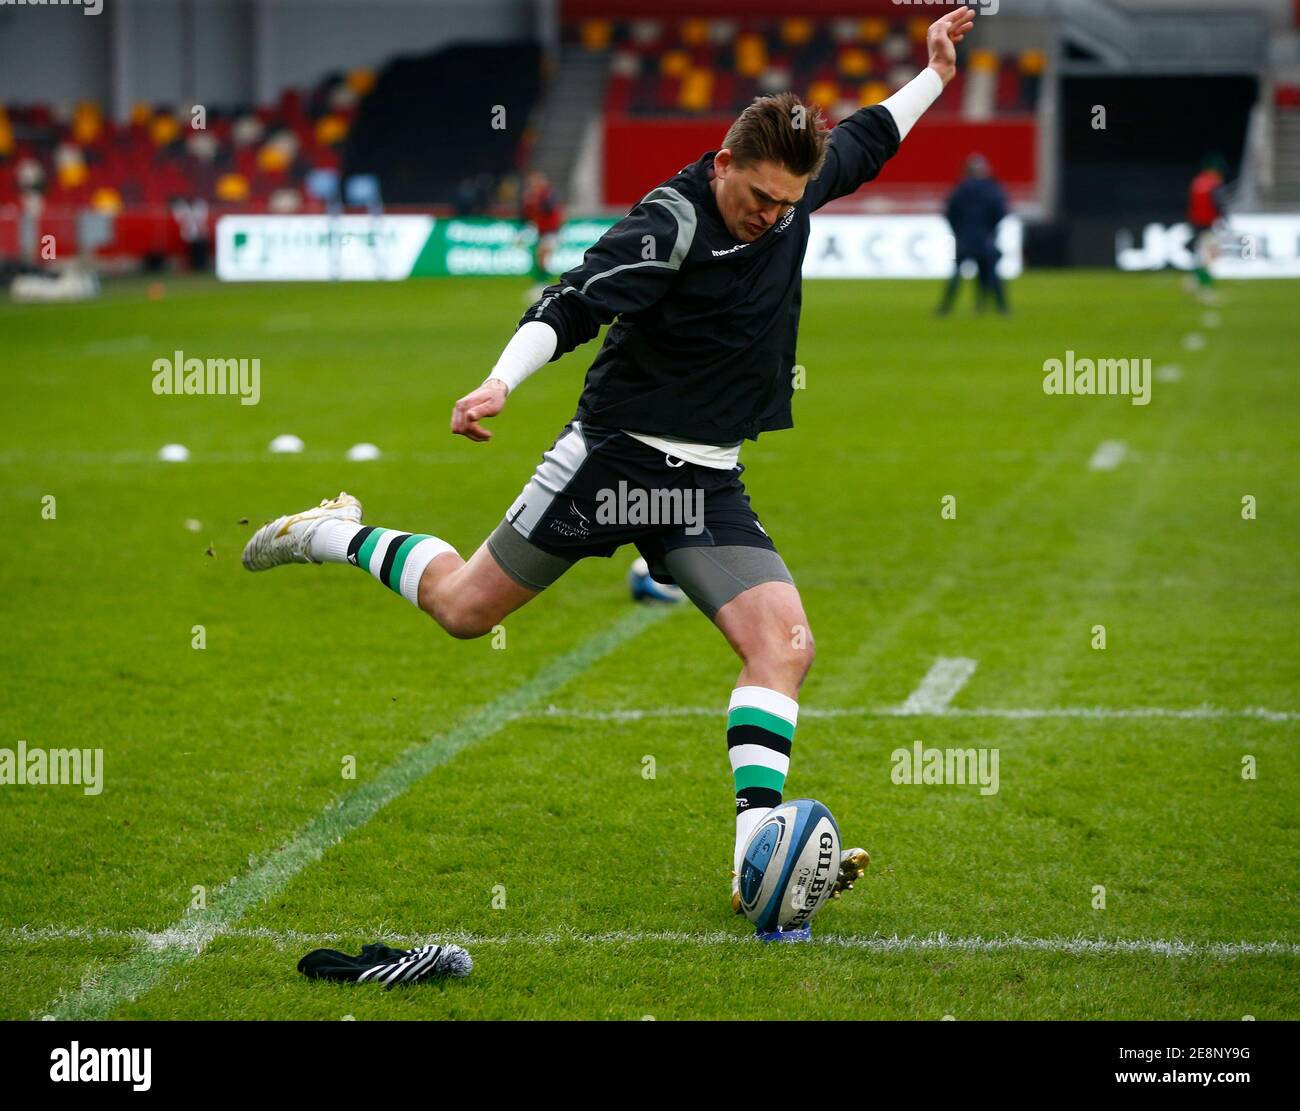 BRENTFORD, ENGLAND - JANUARY 31: Toby Flood of Newcastle Falcons during warm up during Gallagher Premiership between London Irish and Newcastle Flacons at Brentford Community Stadium, Brentford, UK on 31st January 2021 Credit: Action Foto Sport/Alamy Live News Stock Photo